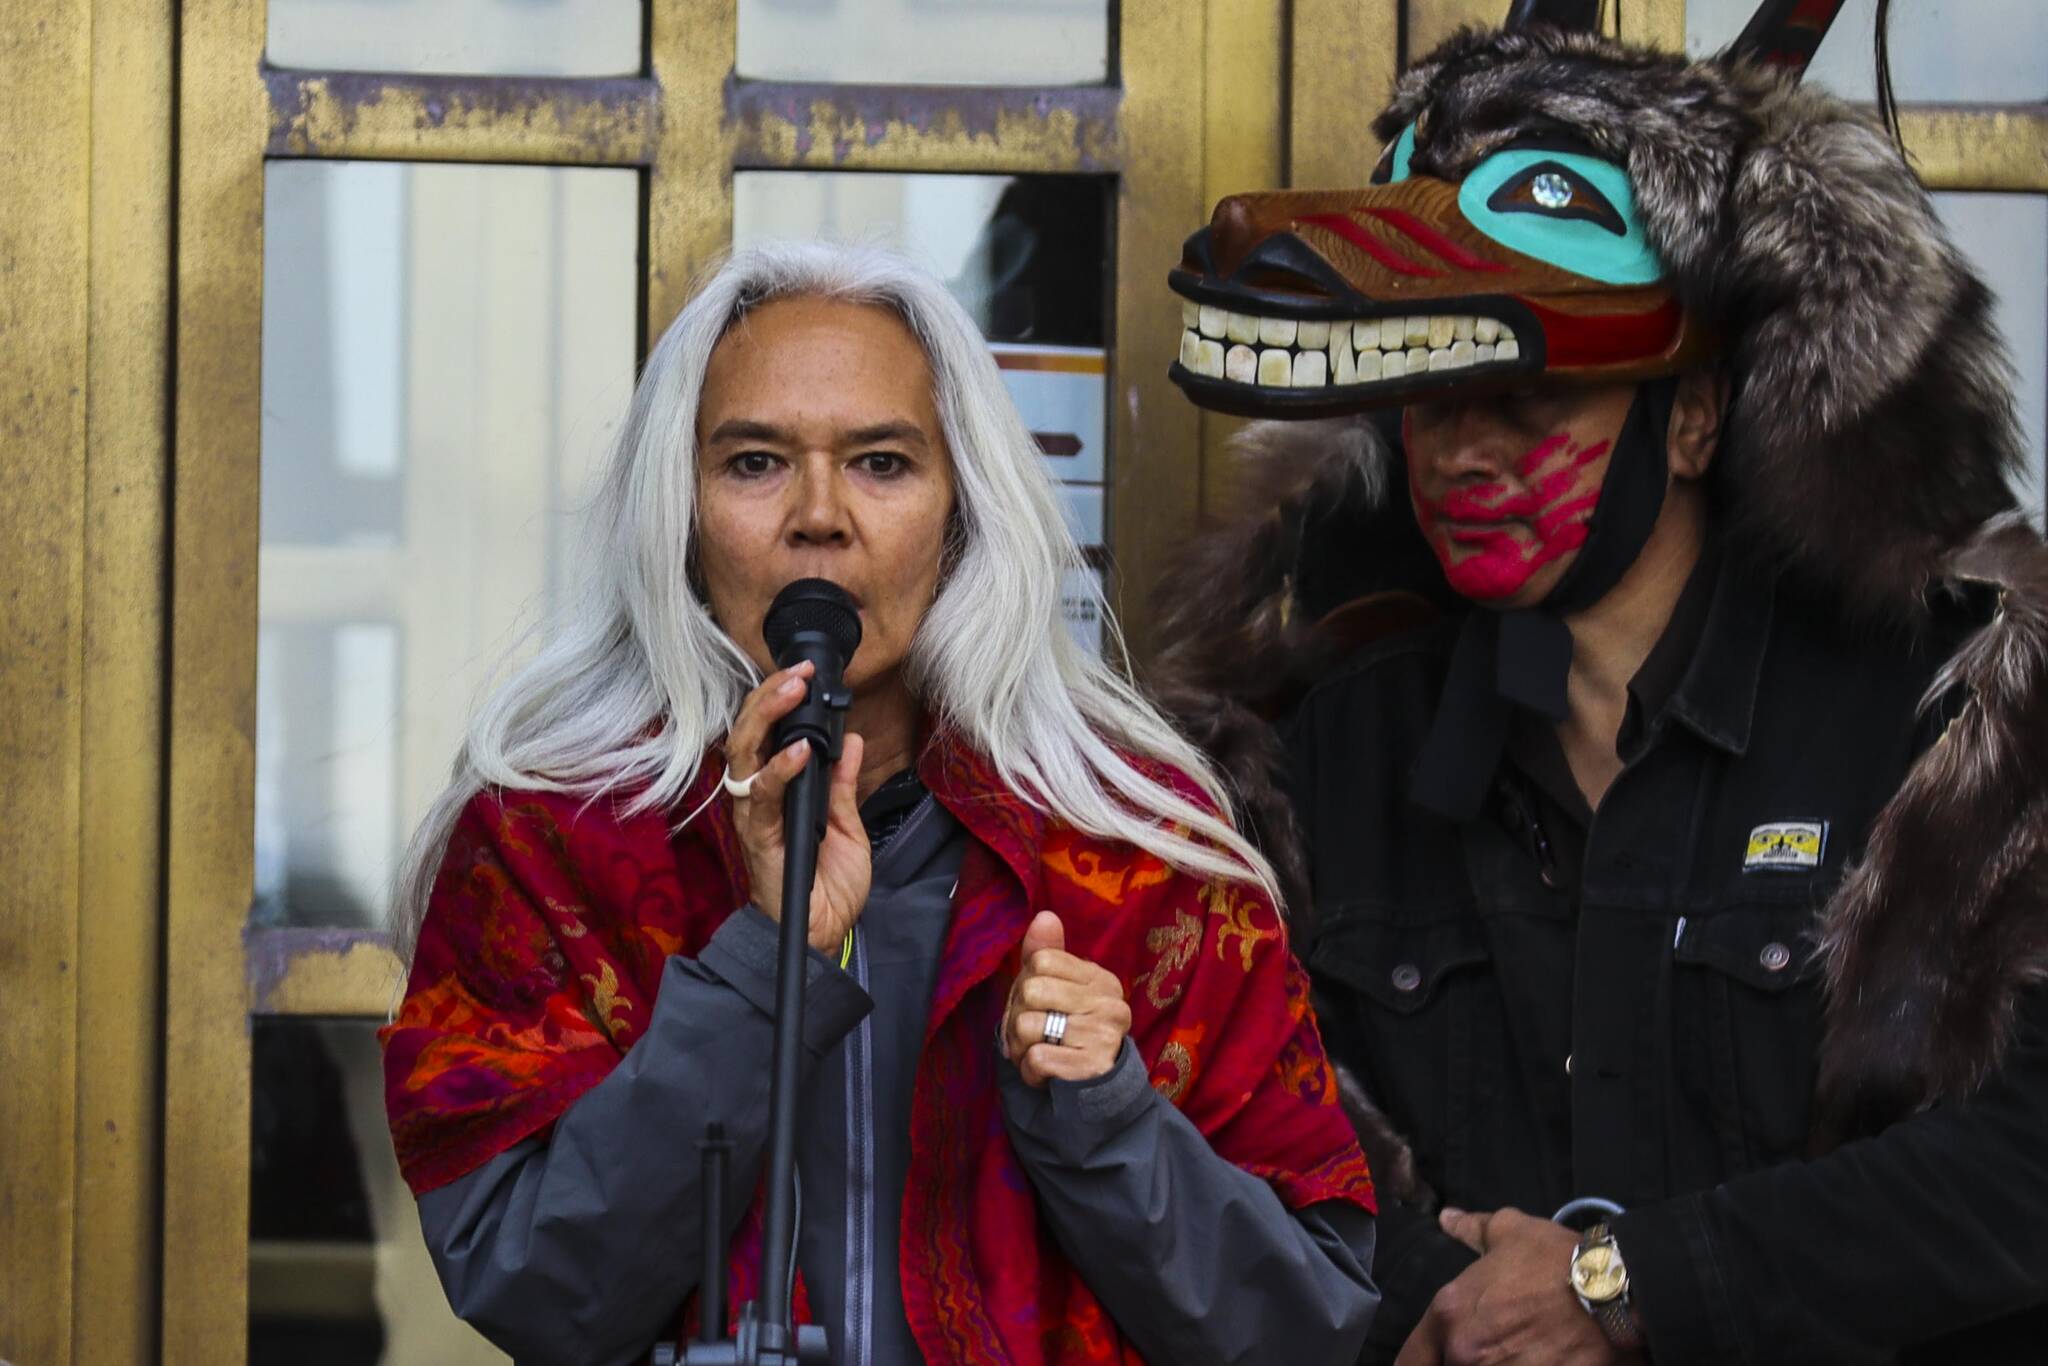 Anne Sears, the new lead investigator for the federally-funded Missing and Murdered Indigenous Persons Initiative, speaks during the annual rally at the Alaska State Capitol on May 5, 2022. (Michael S. Lockett / Juneau Empire)